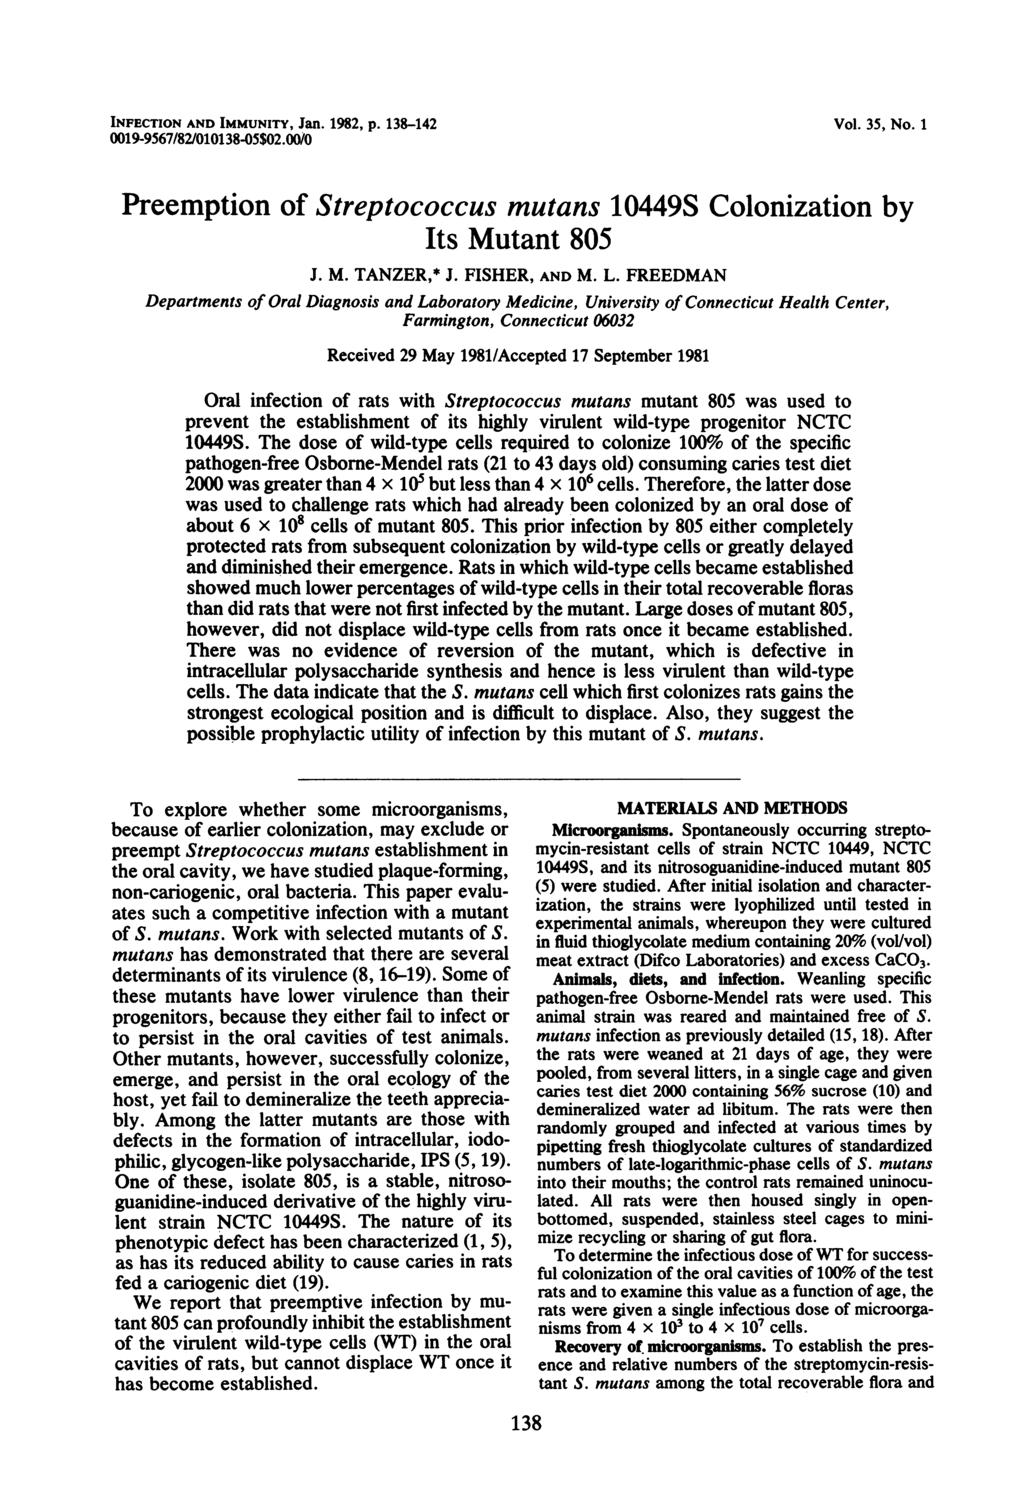 INFECTION AND IMMUNITY, Jan. 1982, p. 138-142 0019-9567/82/010138-05$02.00/O Vol. 35, No. 1 Preemption of Streptococcus mutans 10449S Colonization by Its Mutant 805 J. M. TANZER,* J. FISHER, AND M. L.